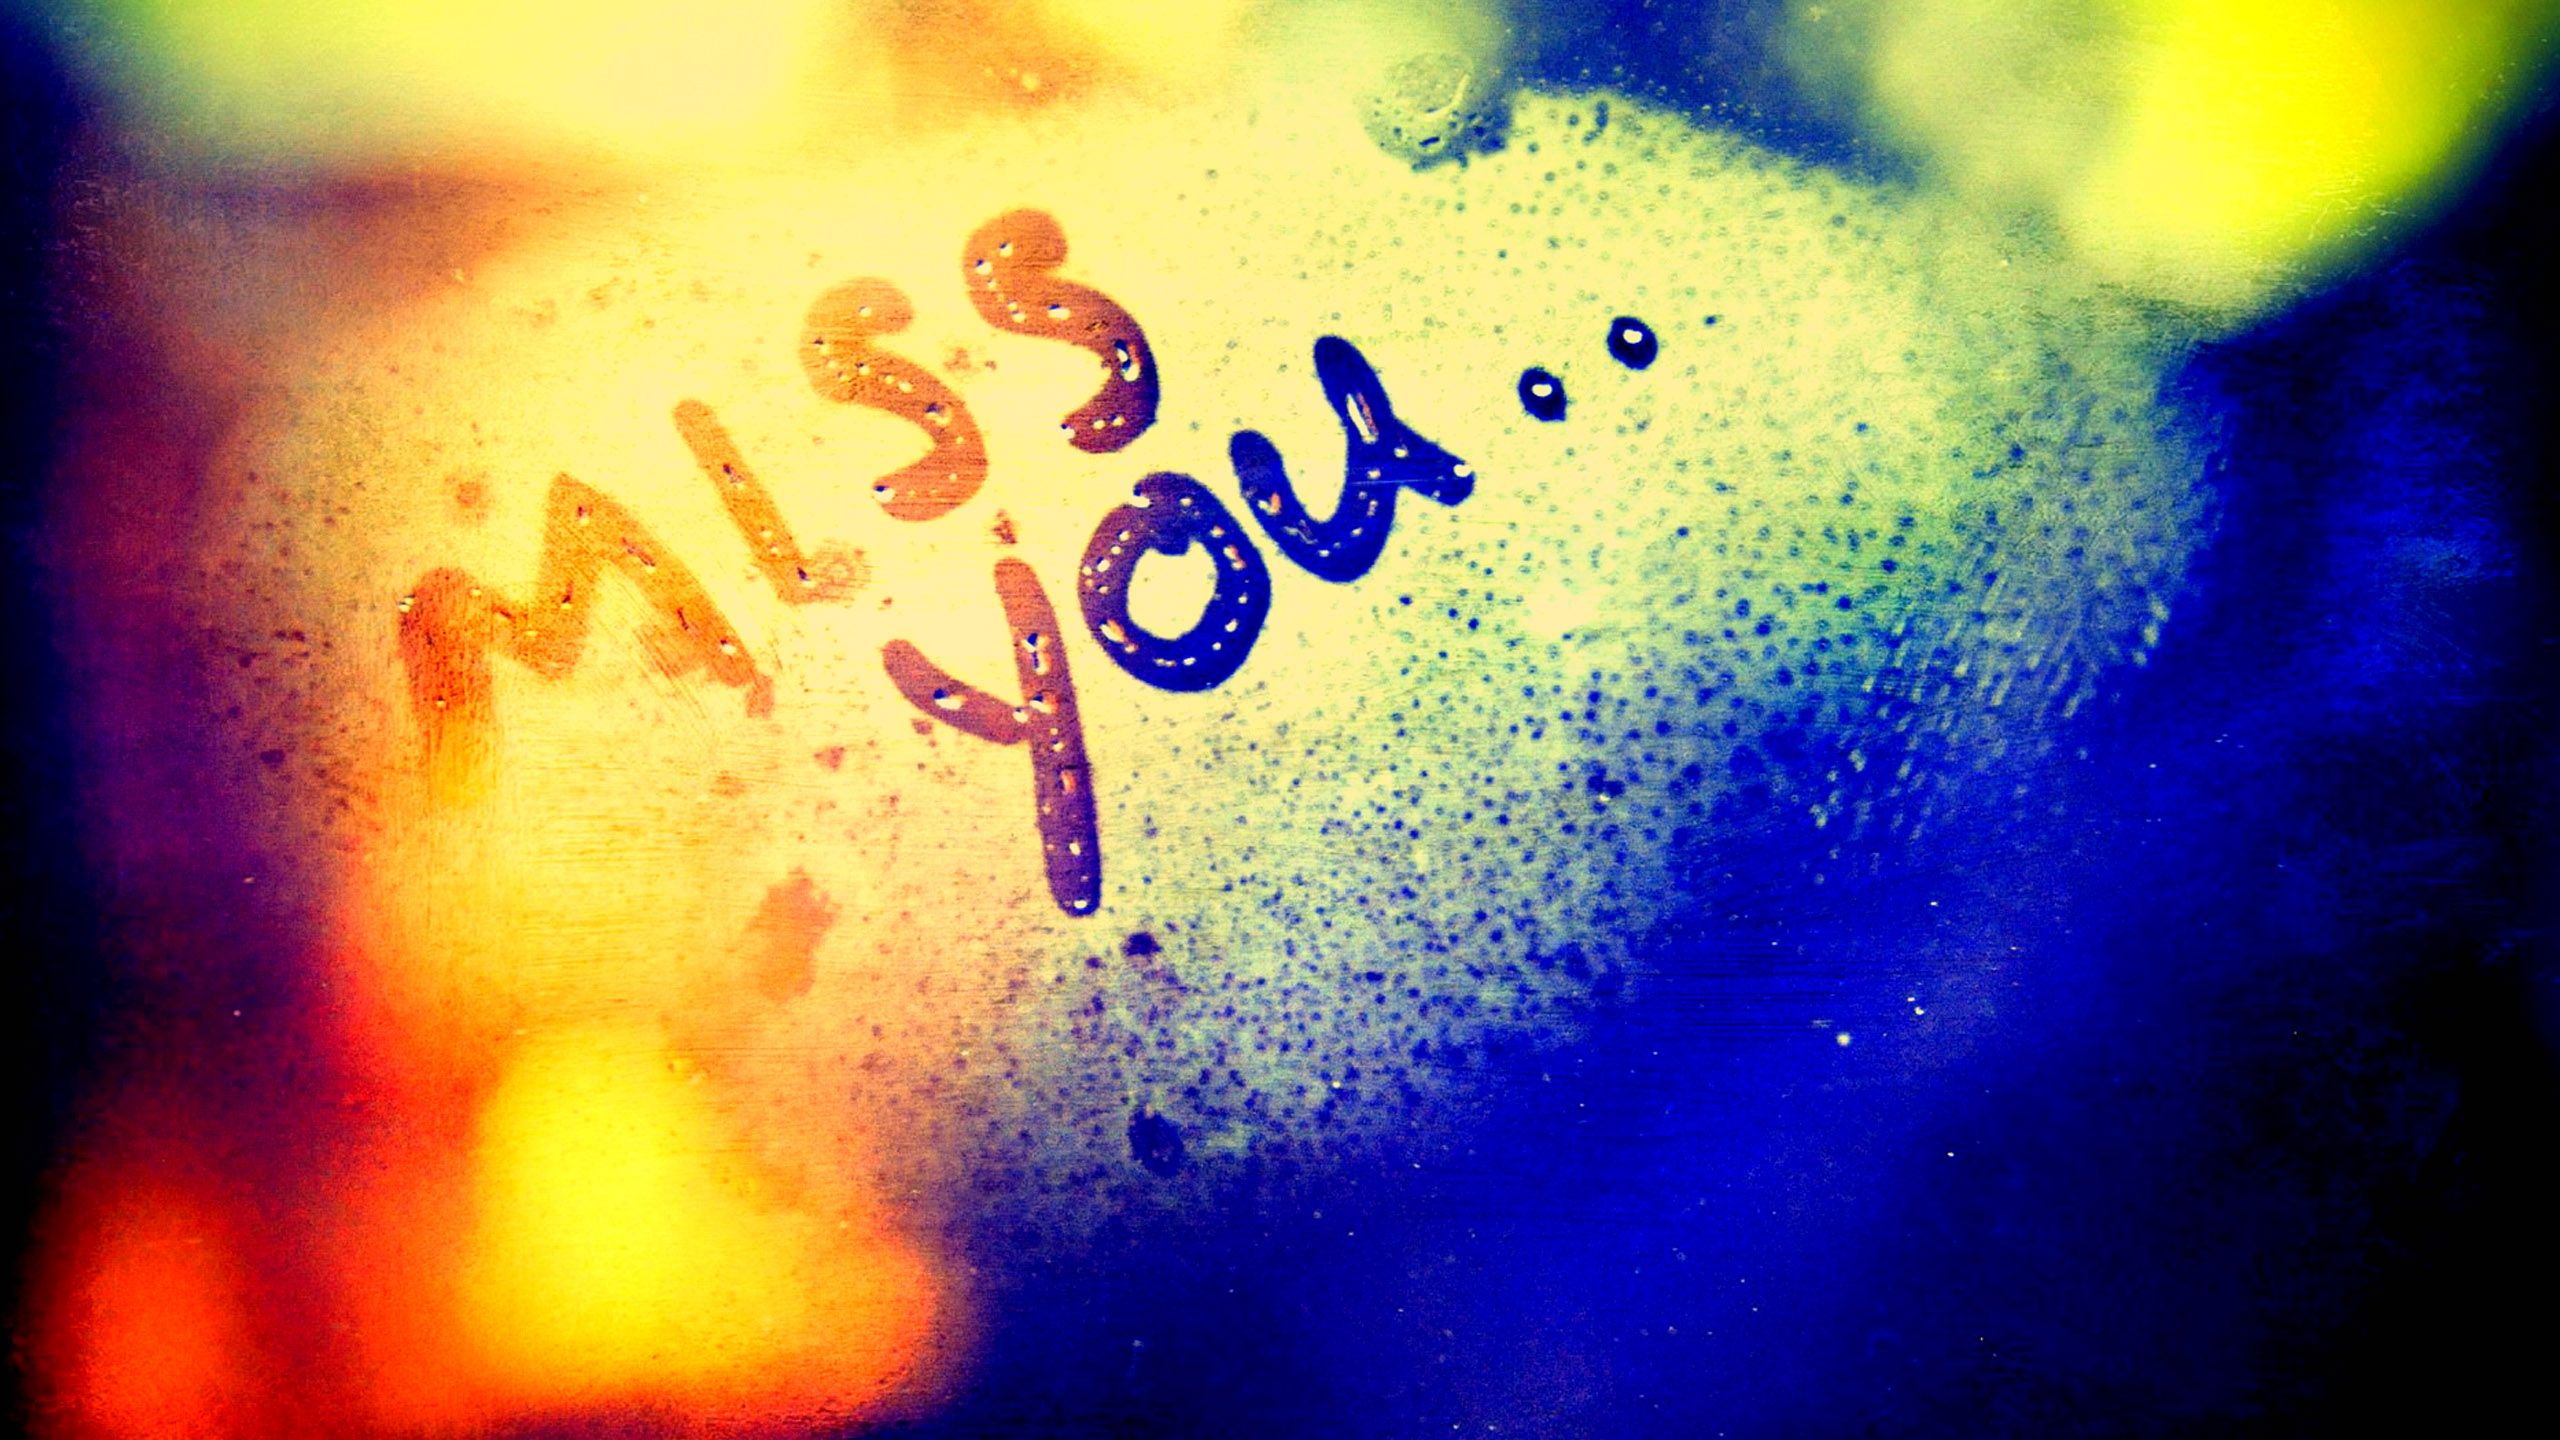 I miss you messages hd wallpapers - Wallpaperss HD